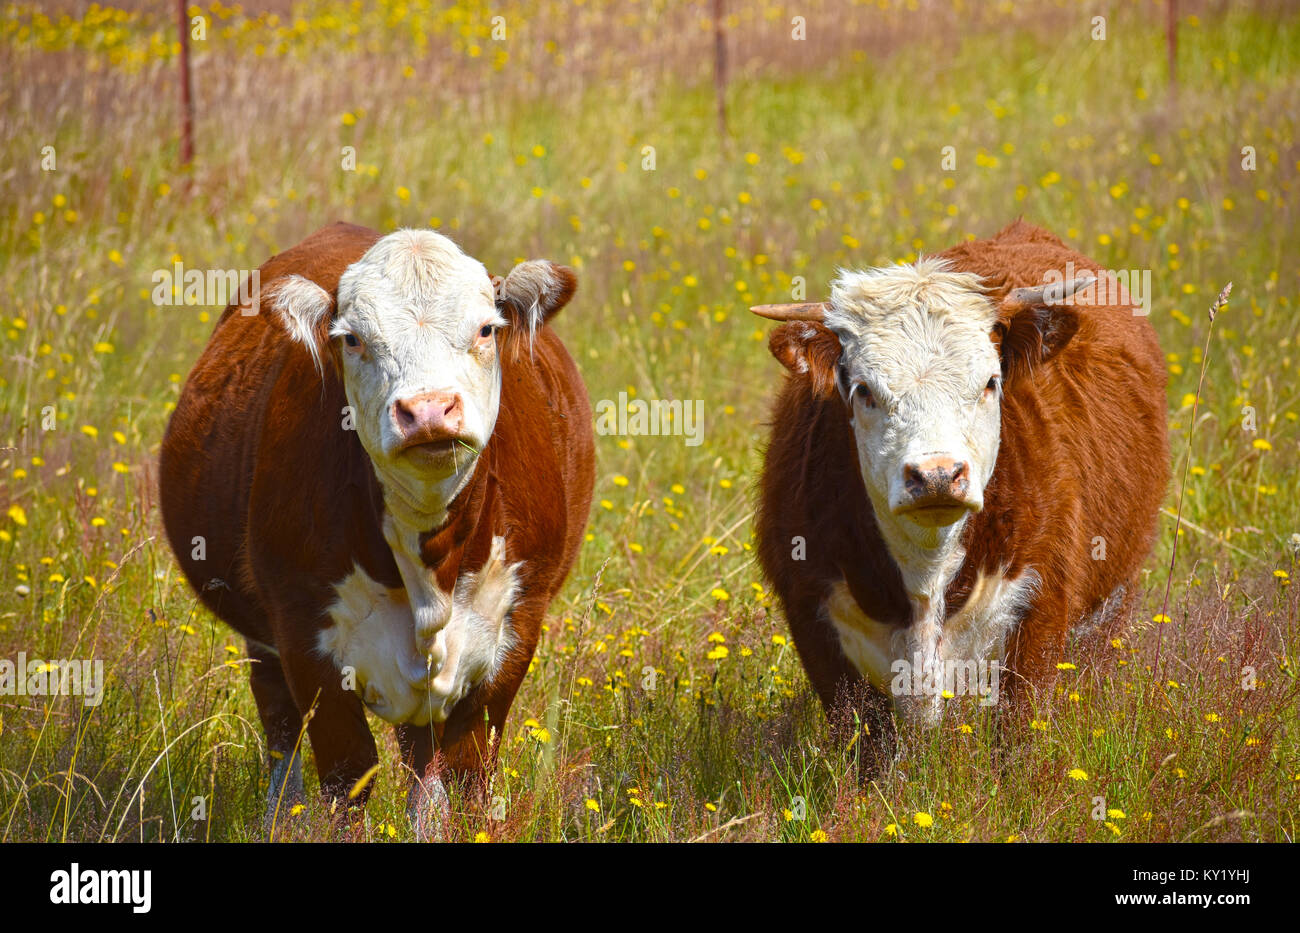 Cow and Bull in a field of dandelions. Stock Photo